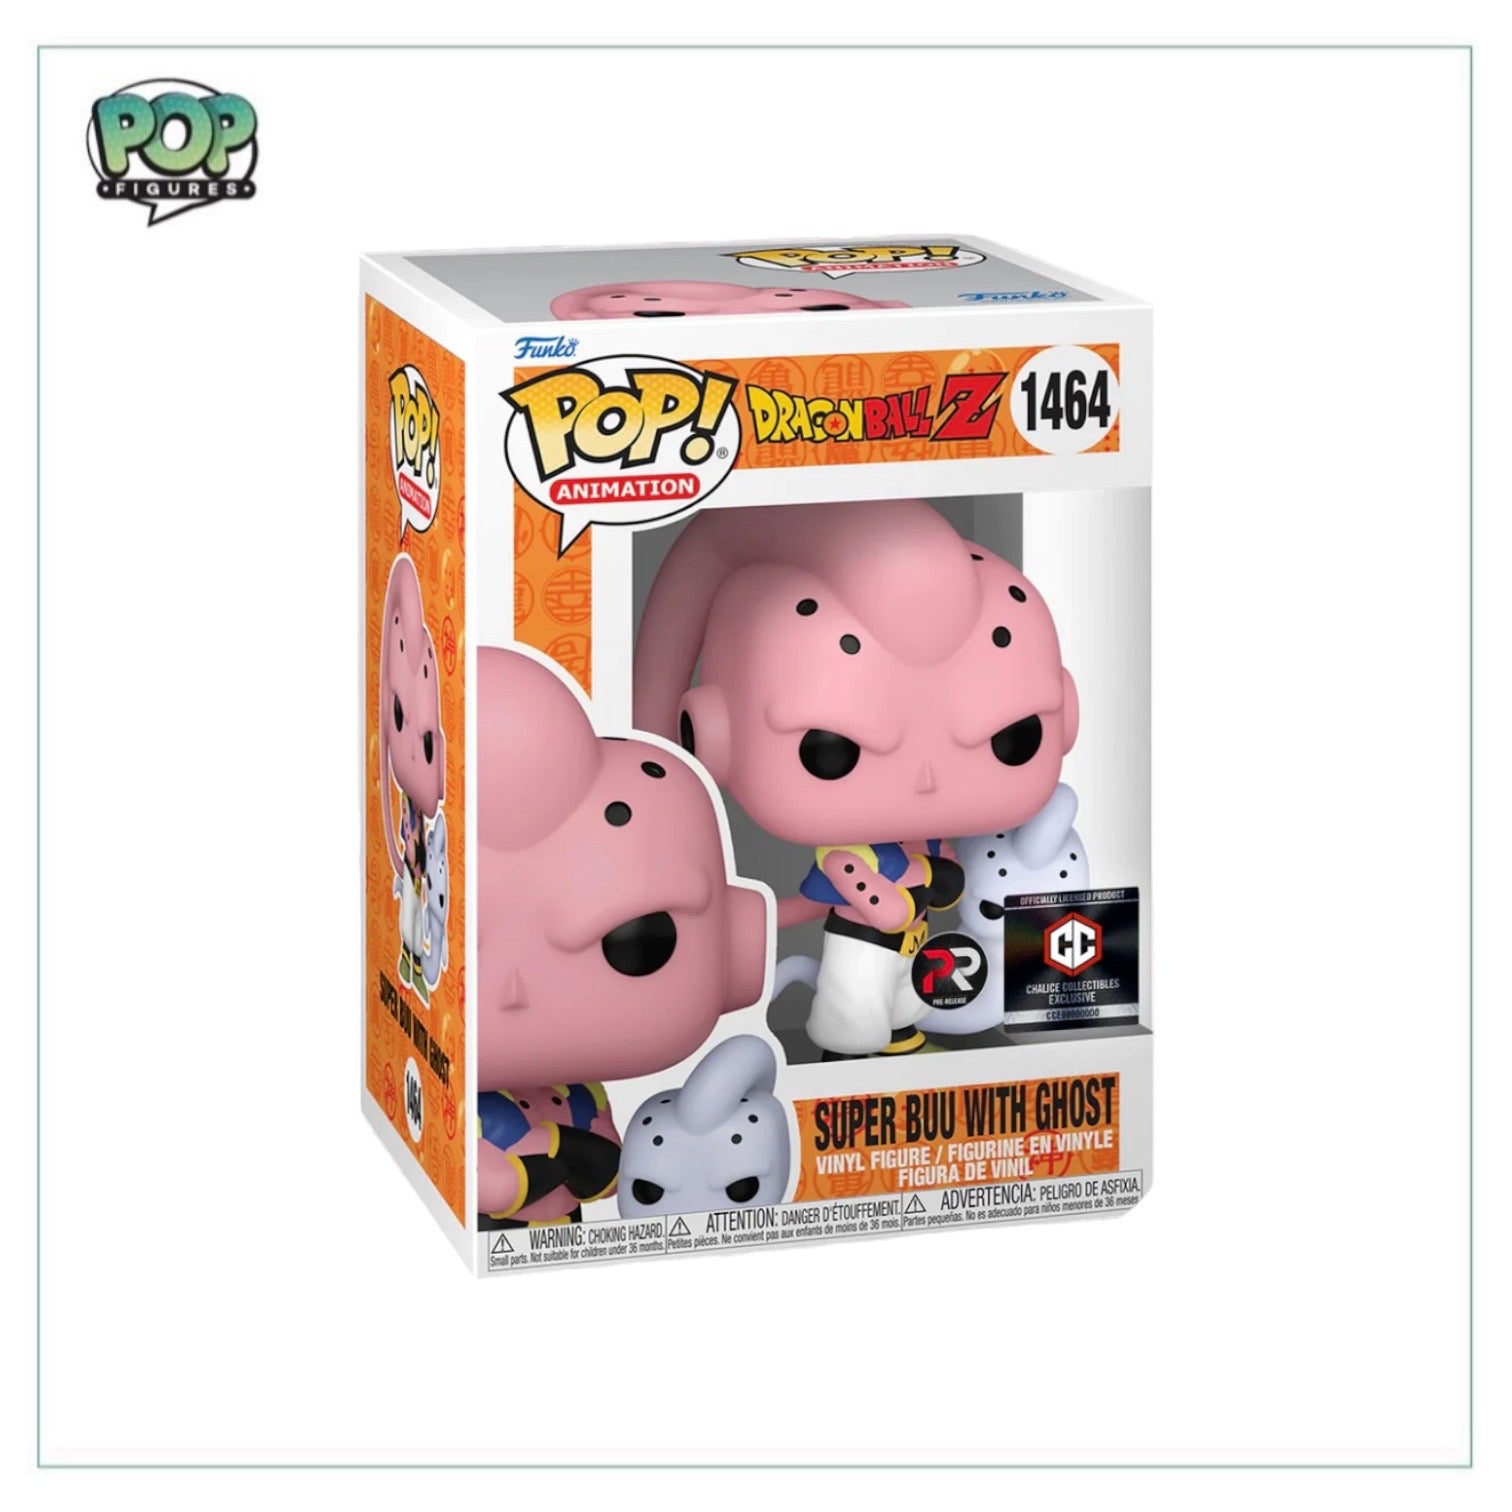 Super Buu with Ghost #1464 Funko Pop! - Dragon Ball Z - Chalice Collectibles Pre-Release Exclusive